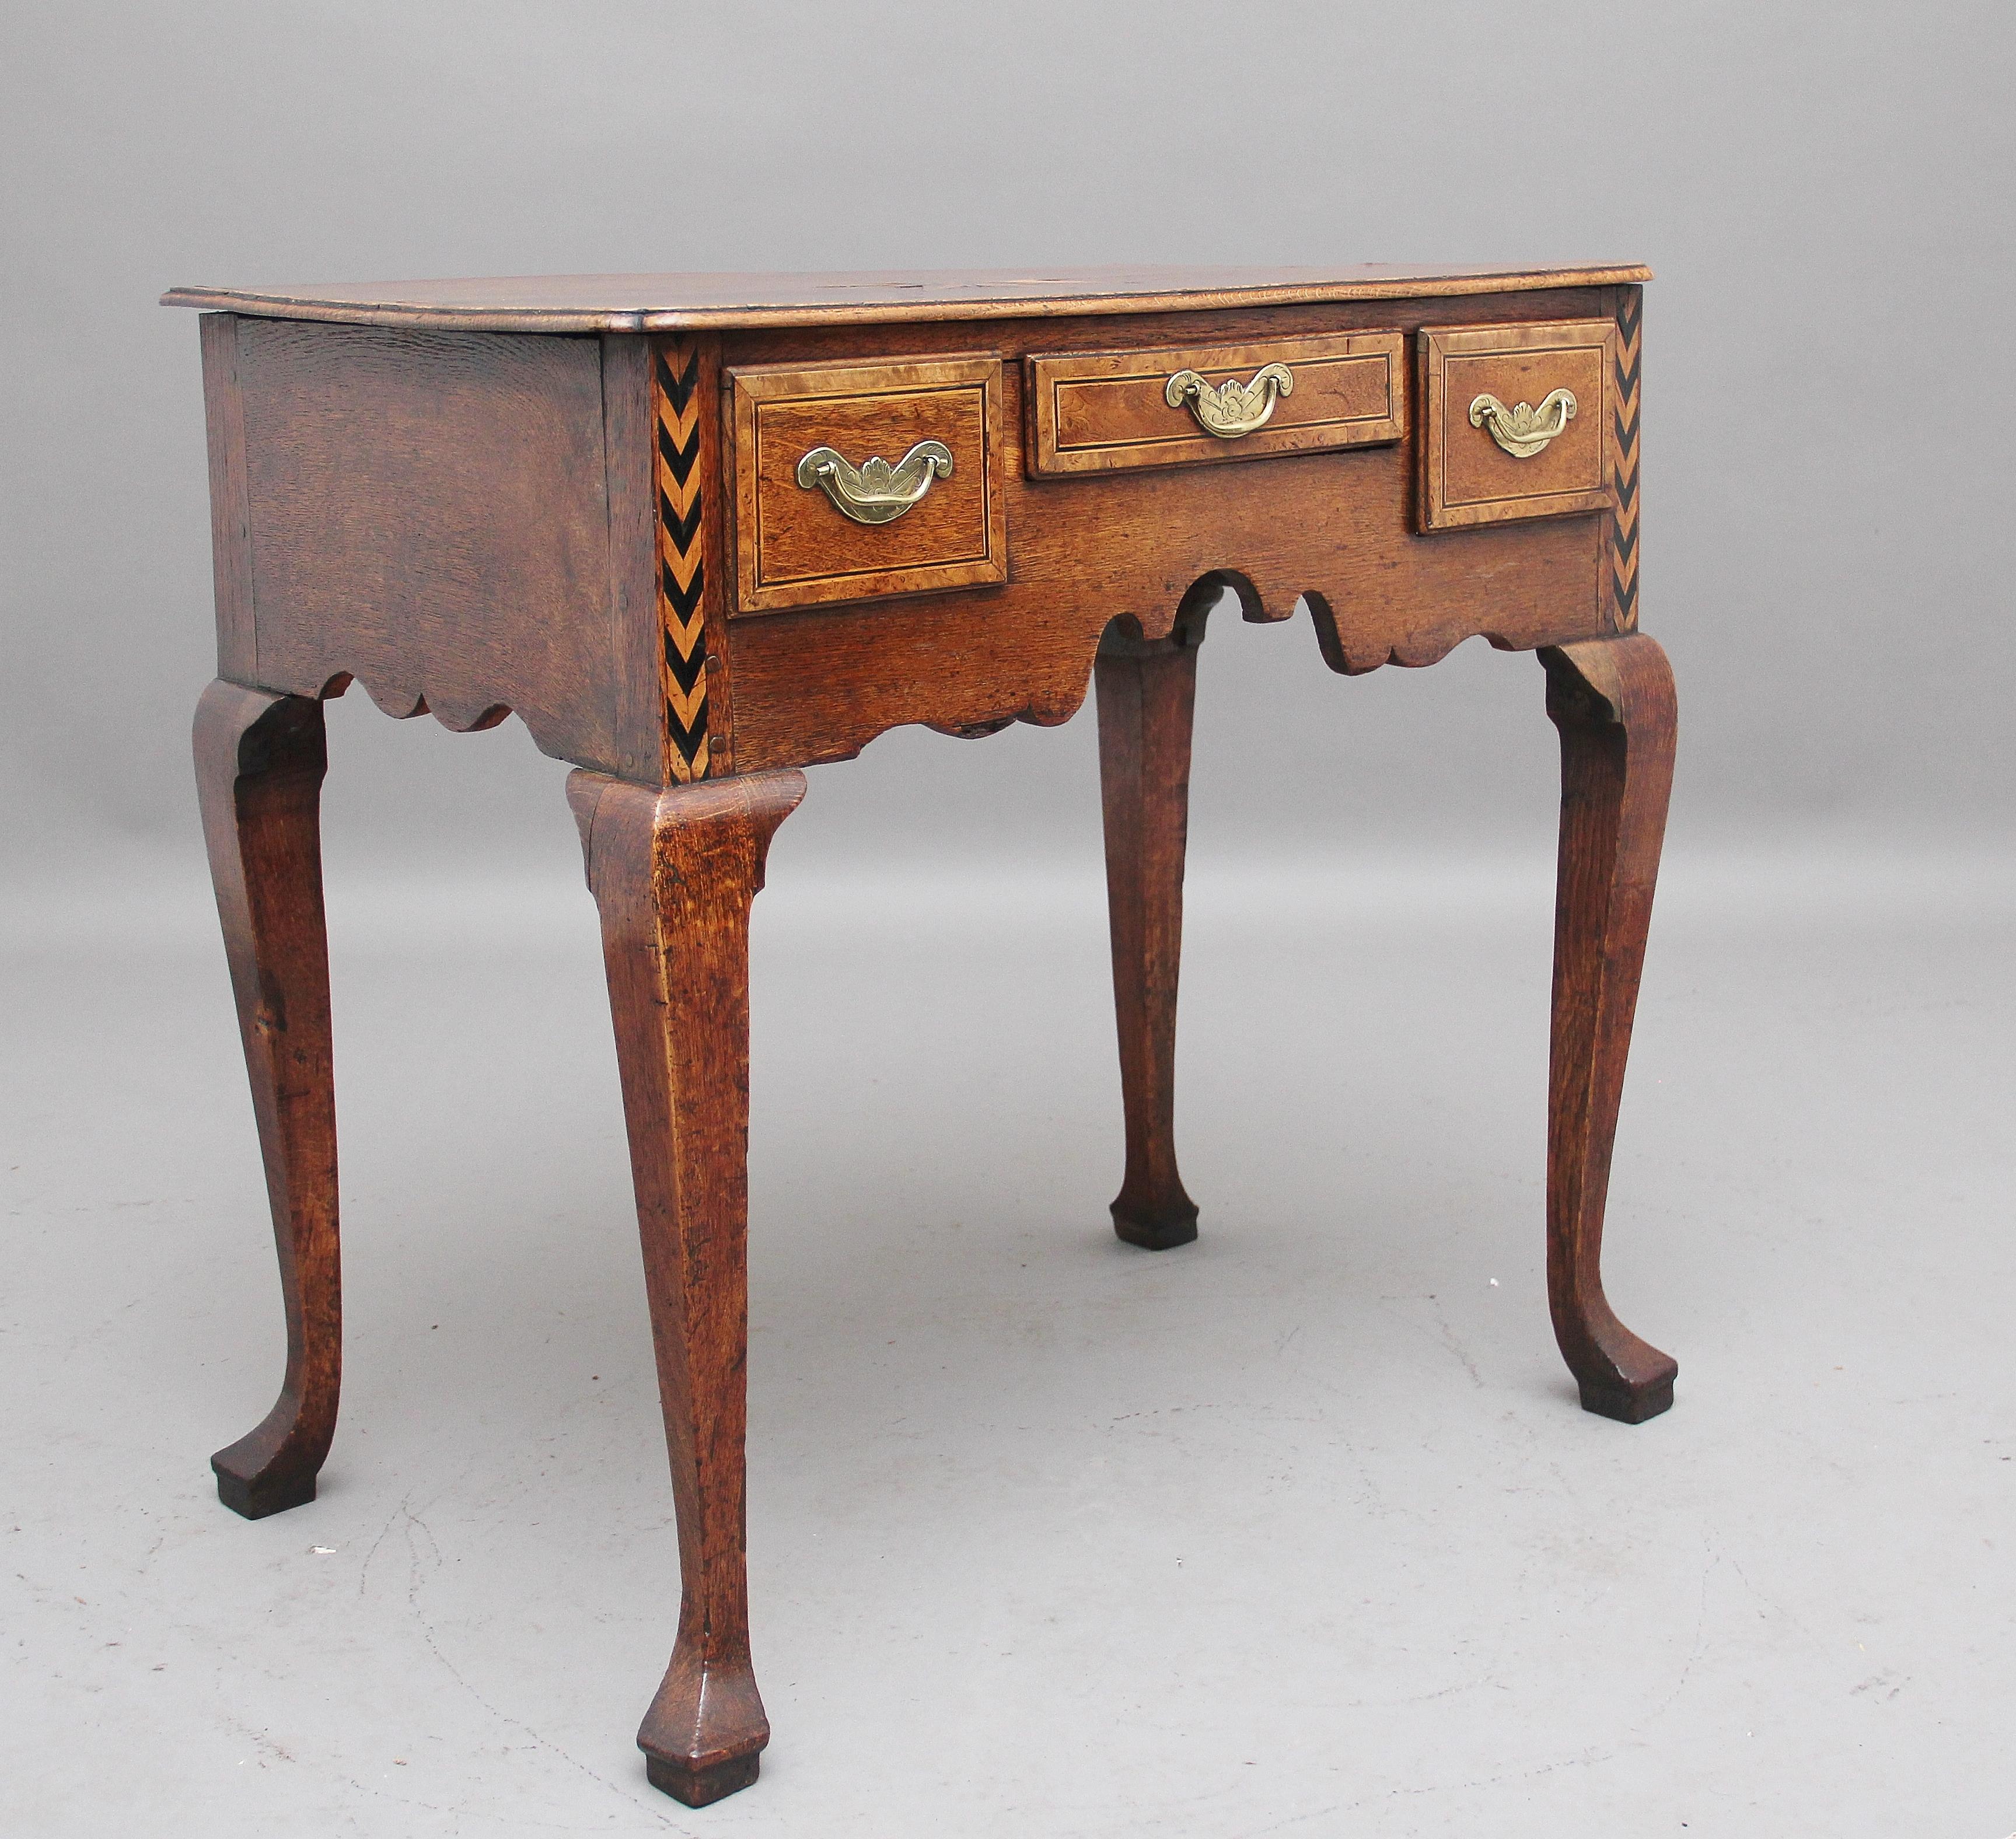 A lovely quality and decorative 18th century oak lowboy, the moulded edge top having a wonderful figured top with a sunburst motif at the centre, inlay running along the edge of the top, three drawers below with original engraved brass plate